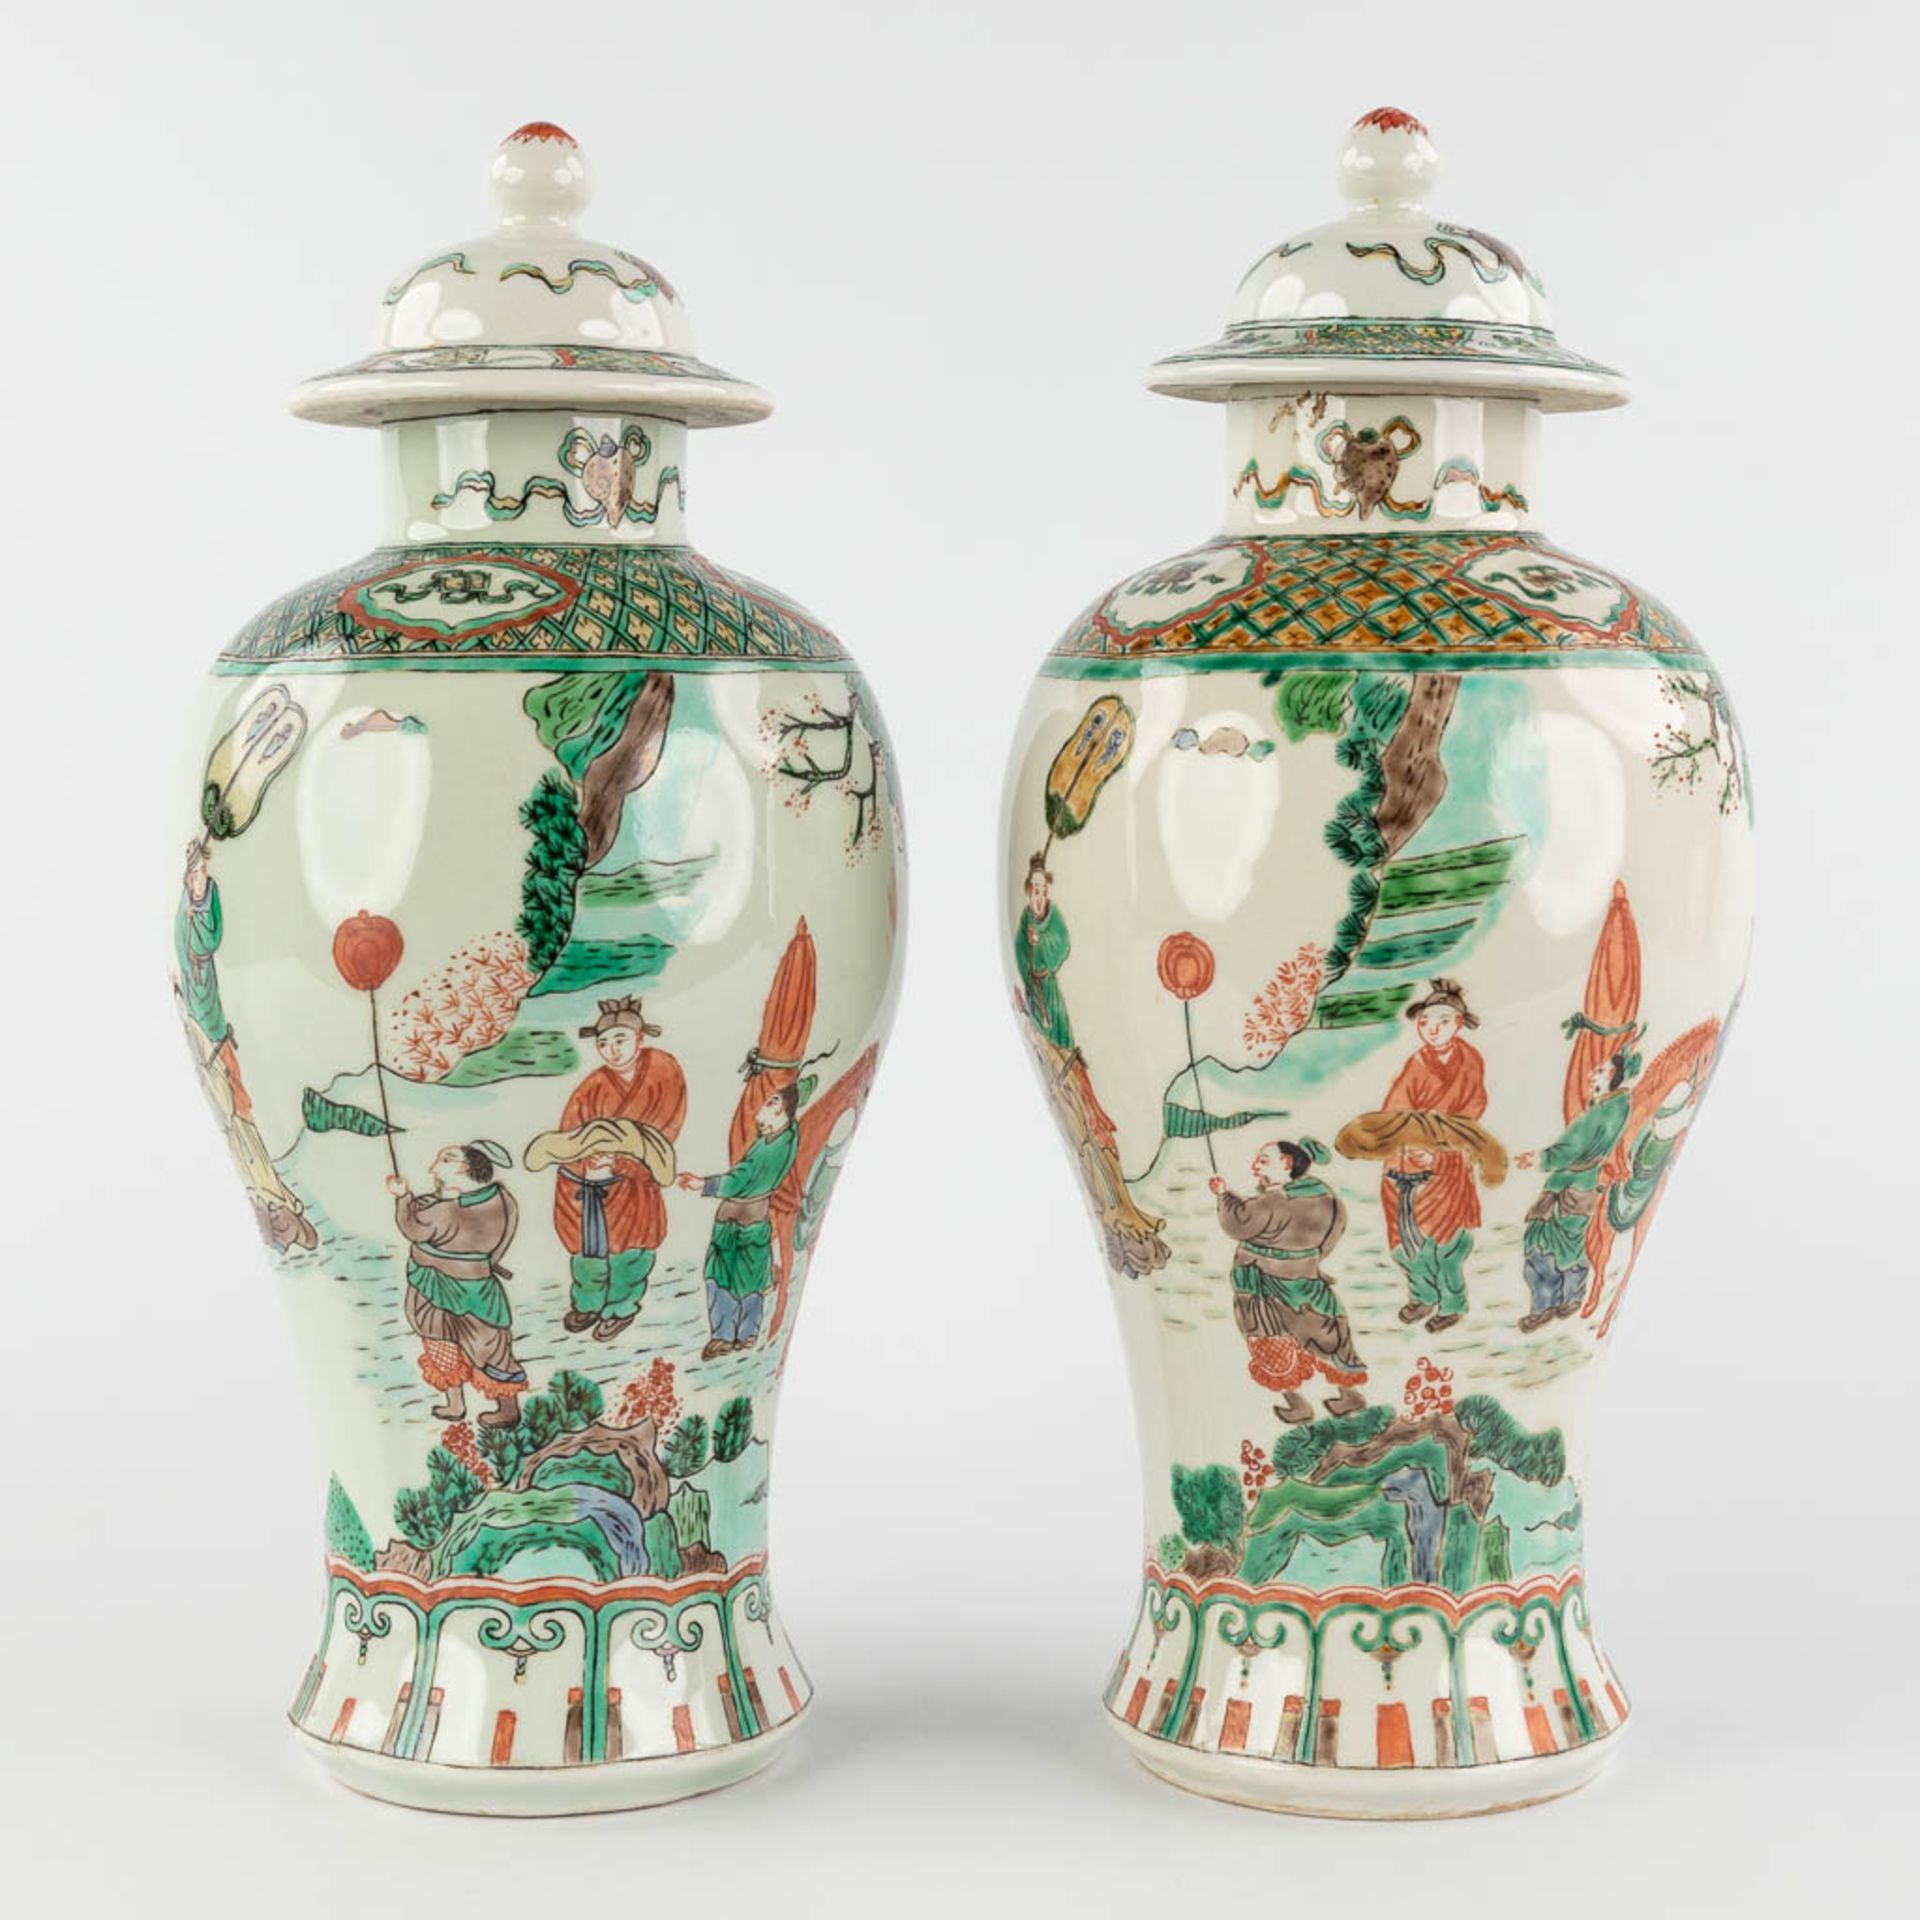 A pair of Chinese Famille Verte with farmers and symbols of happiness. 19th/20th C. (H:29 x D:13 cm) - Image 3 of 14